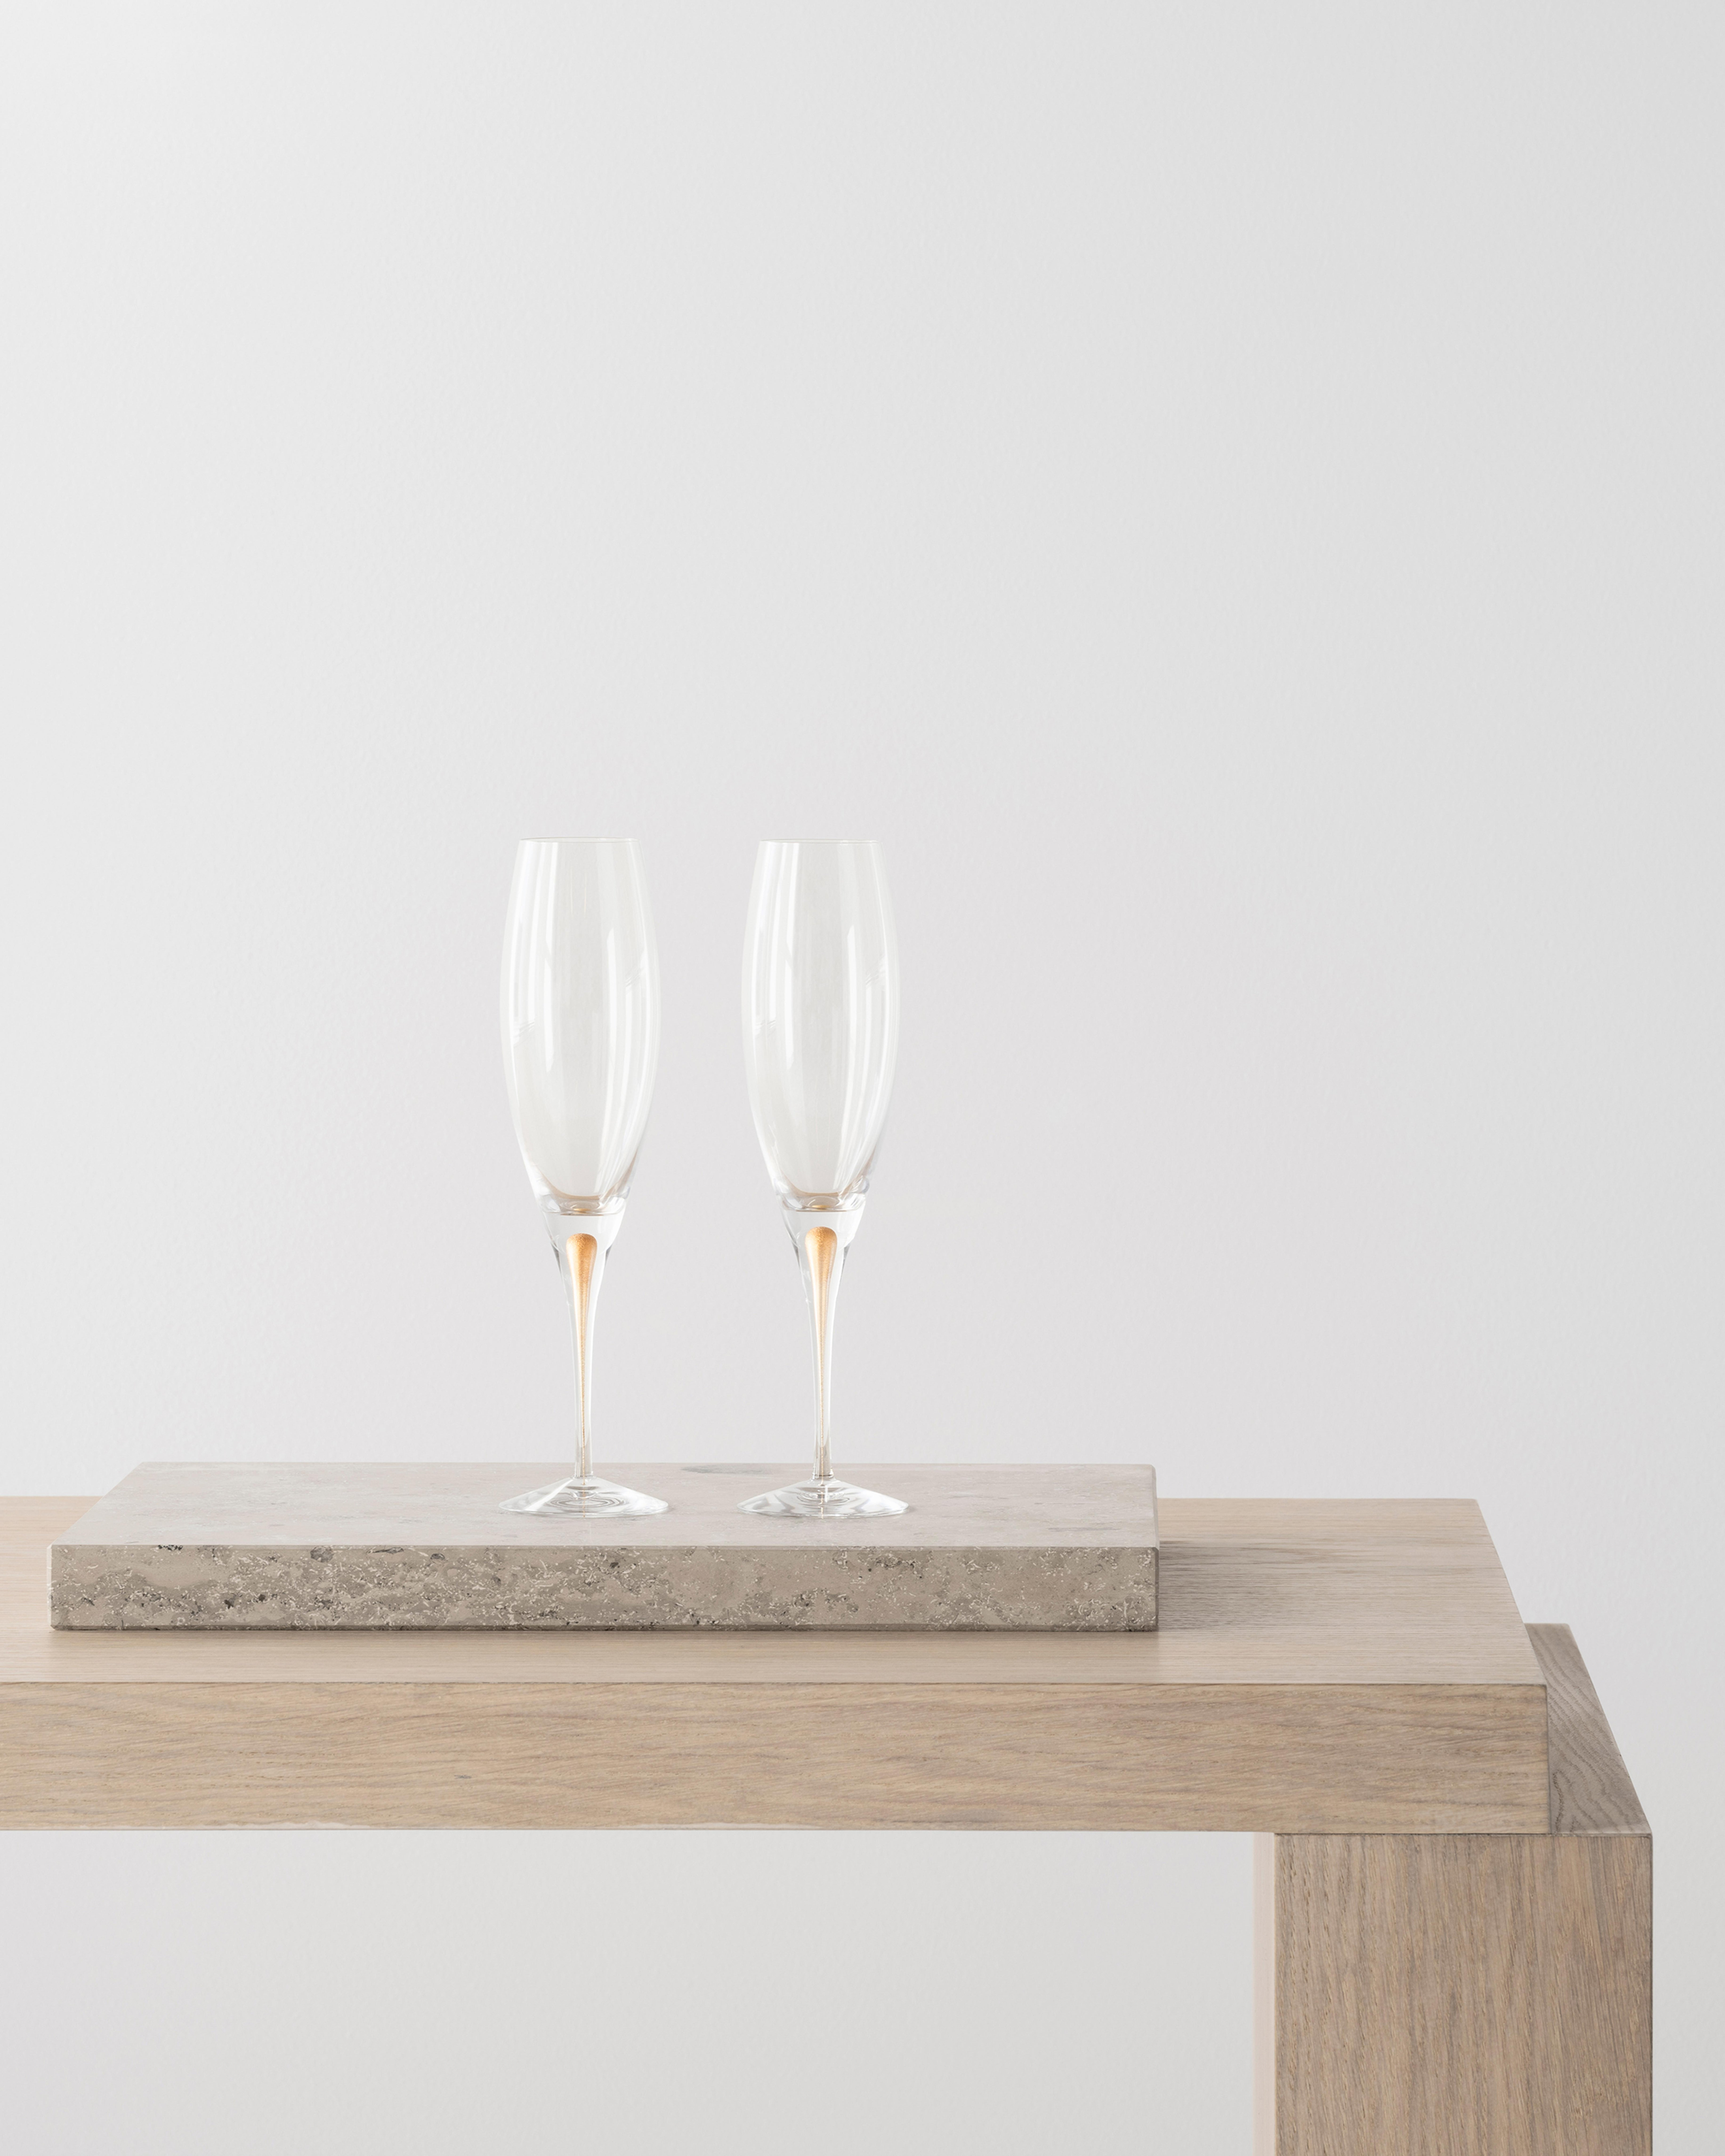 Intermezzo Gold is a true celebration. Sealed into the glass, rising up from the surface of the table, is a teardrop-shaped enigma. Erika Lagerbielke created a timeless classic in 1984 with the Intermezzo collection, originally designed in a blue